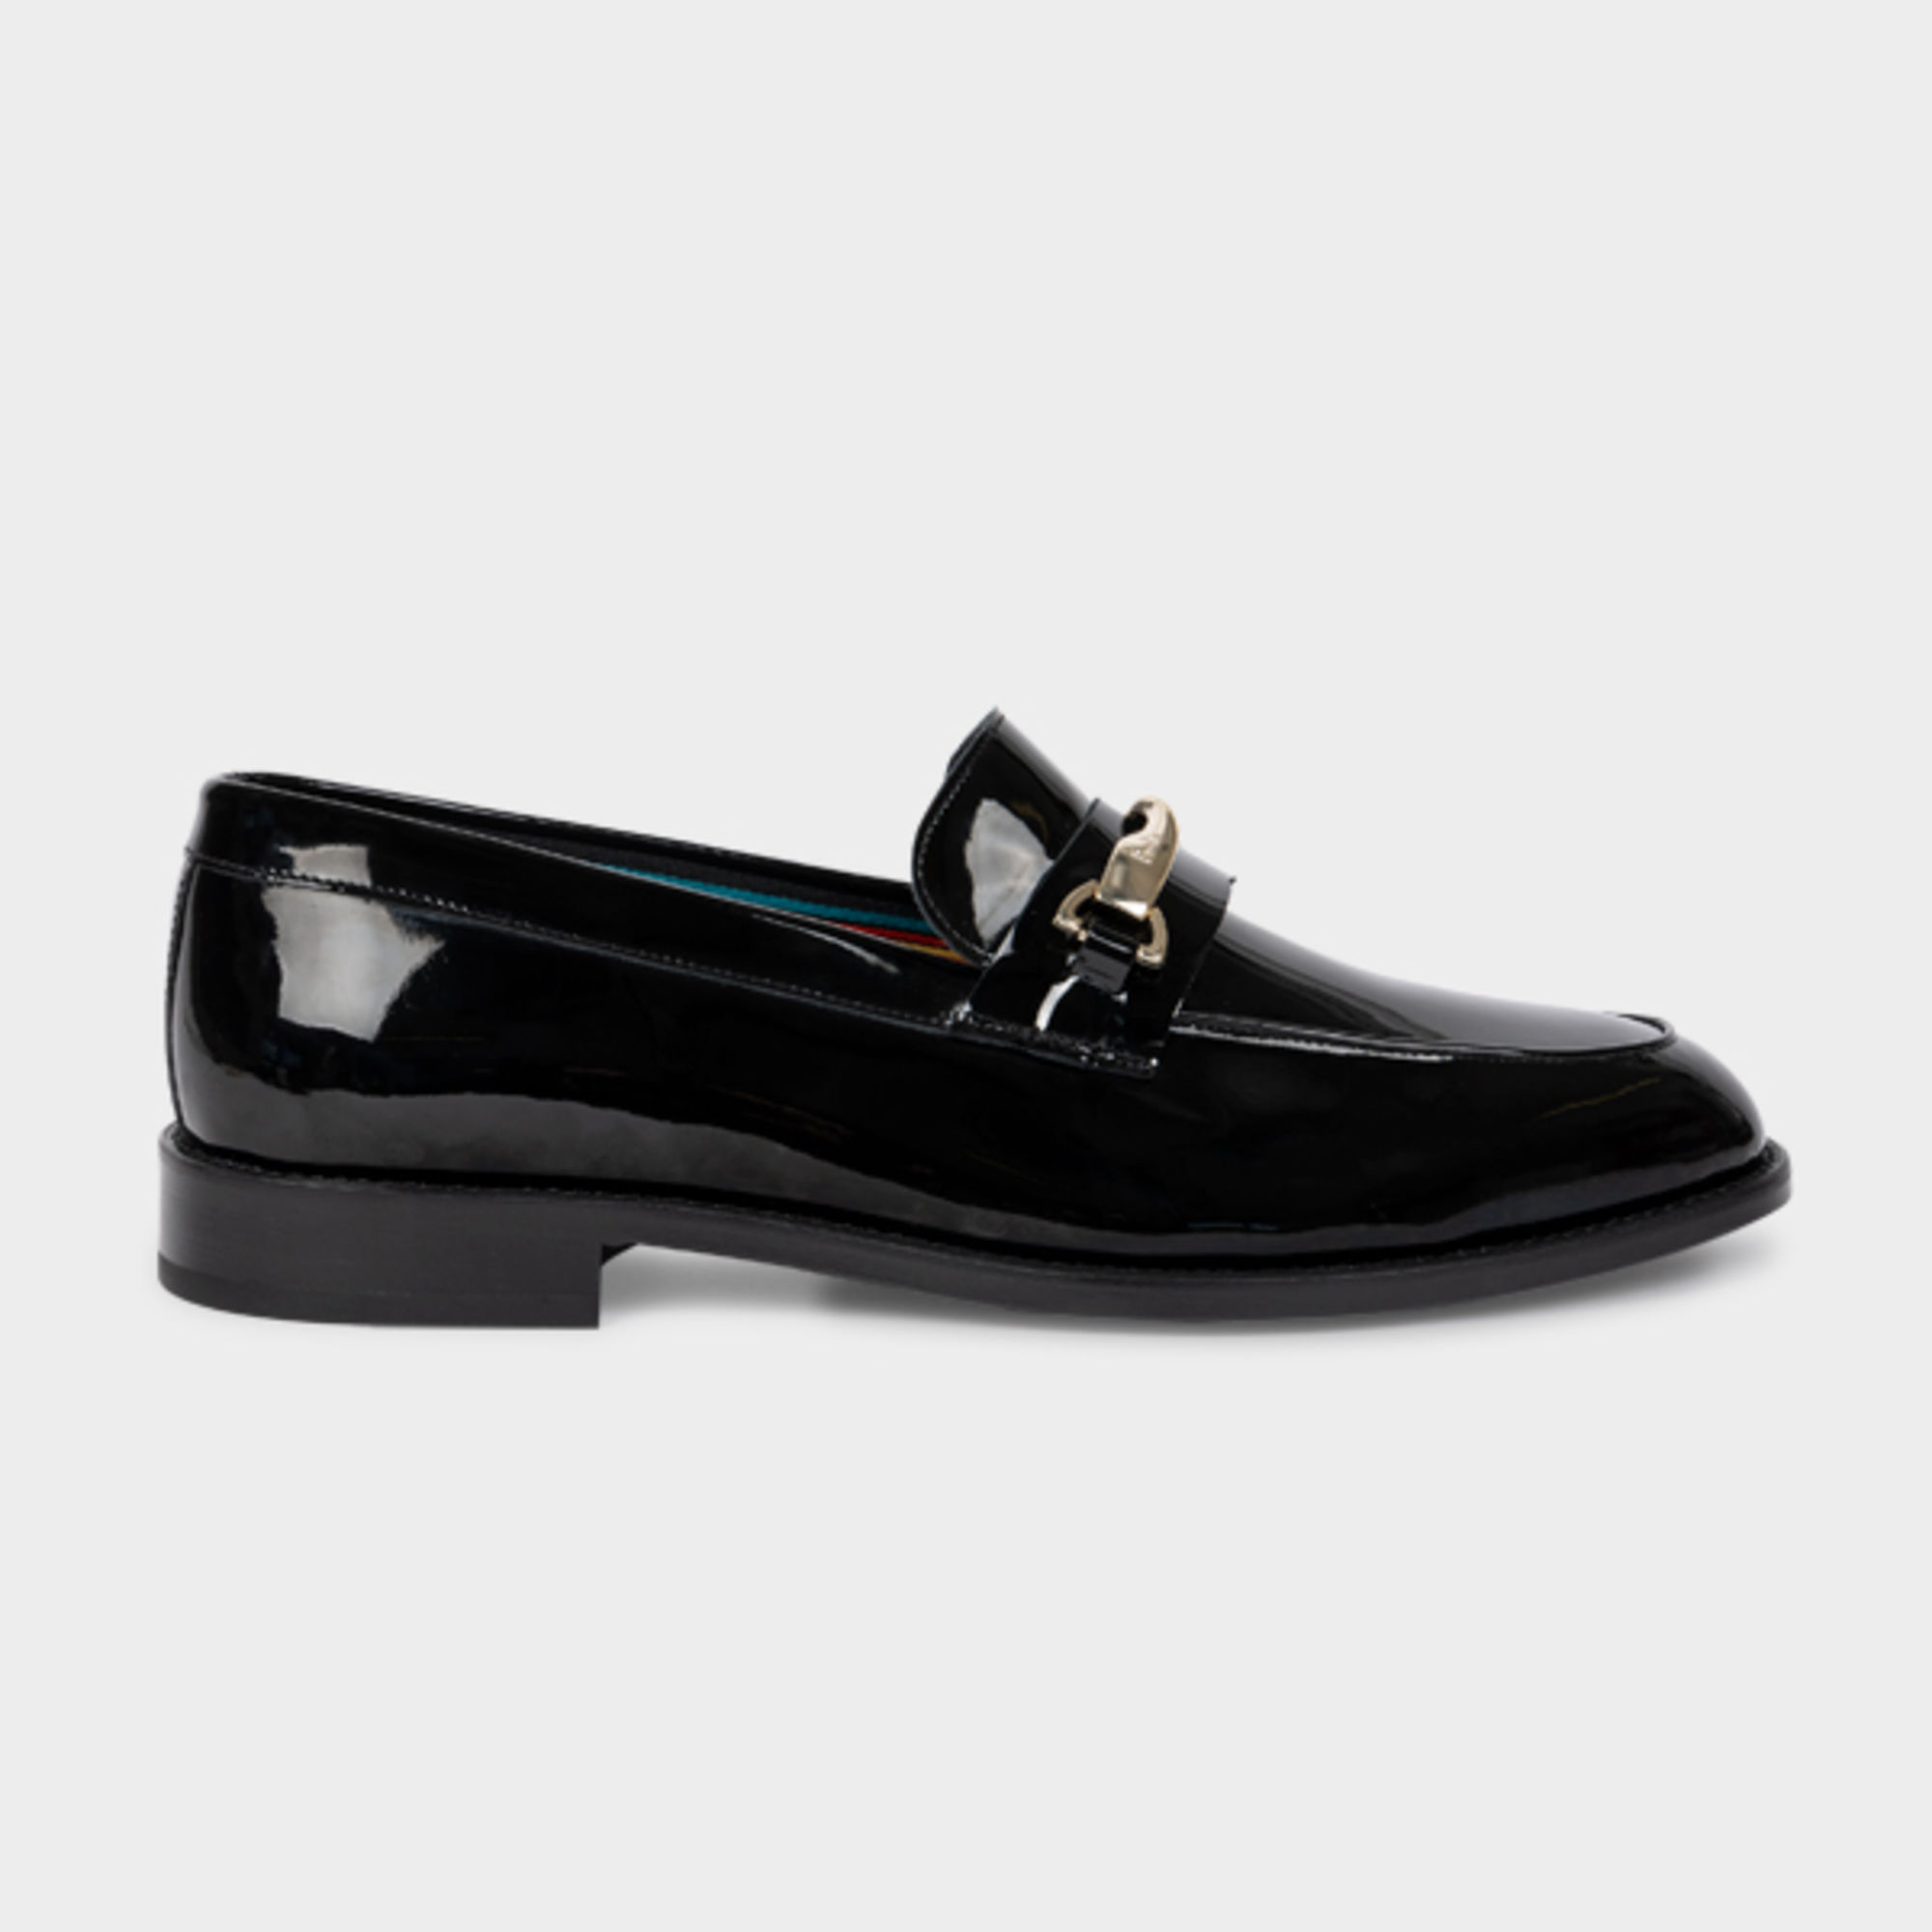 PAUL SMITH BLACK PATENT LEATHER 'MONTEGO' LOAFERS